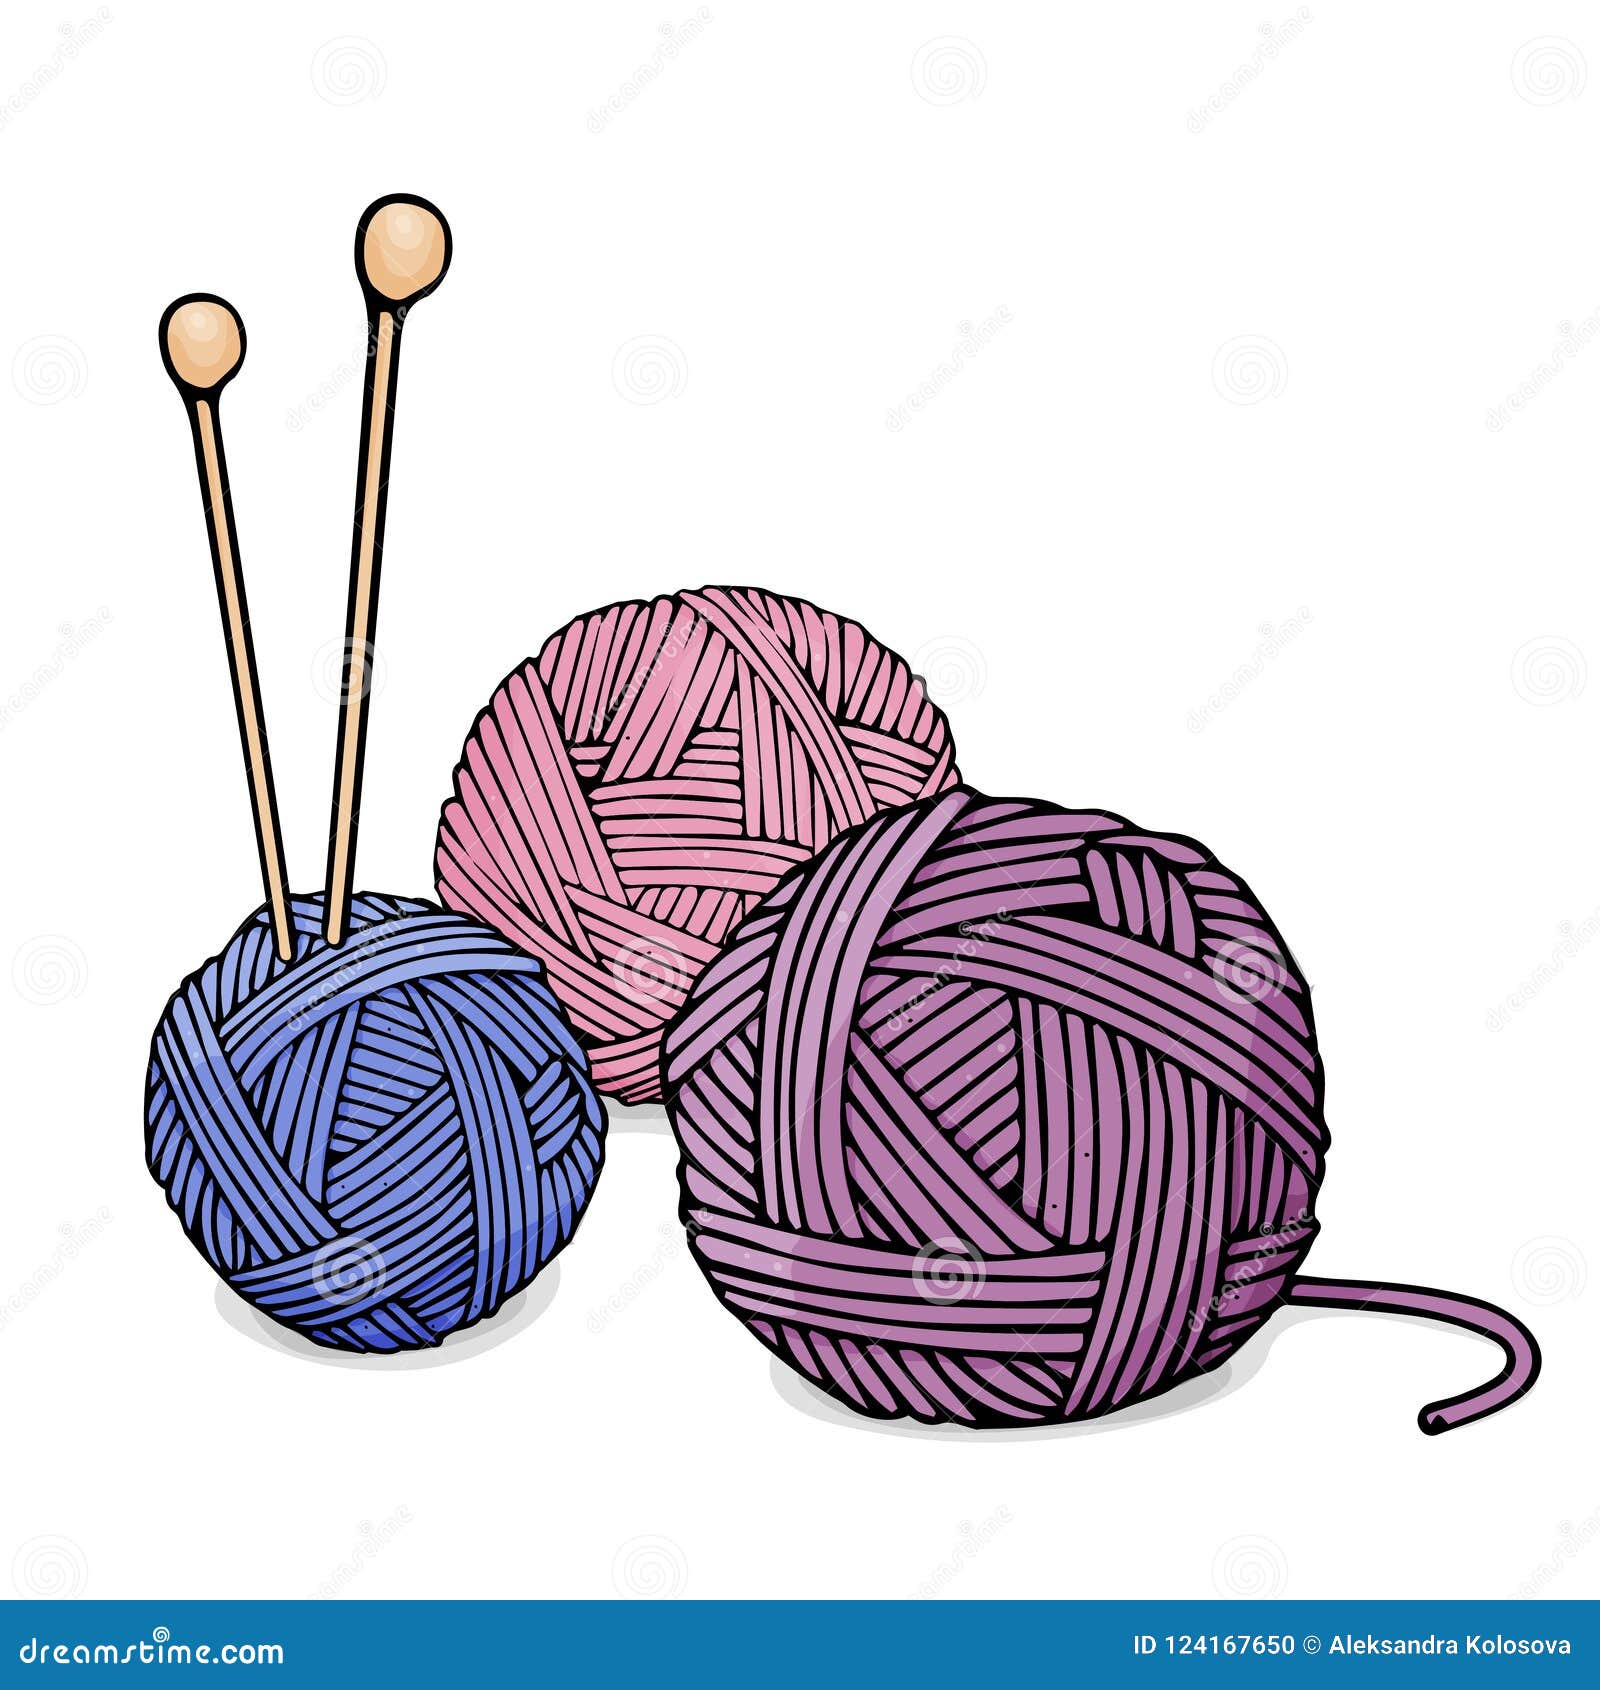 Tangles of Different Colors of Wool for Knitting and Knitting Needles.  Colorful Vector Illustration in Sketch Style. Stock Vector - Illustration  of knit, cartoon: 124167650